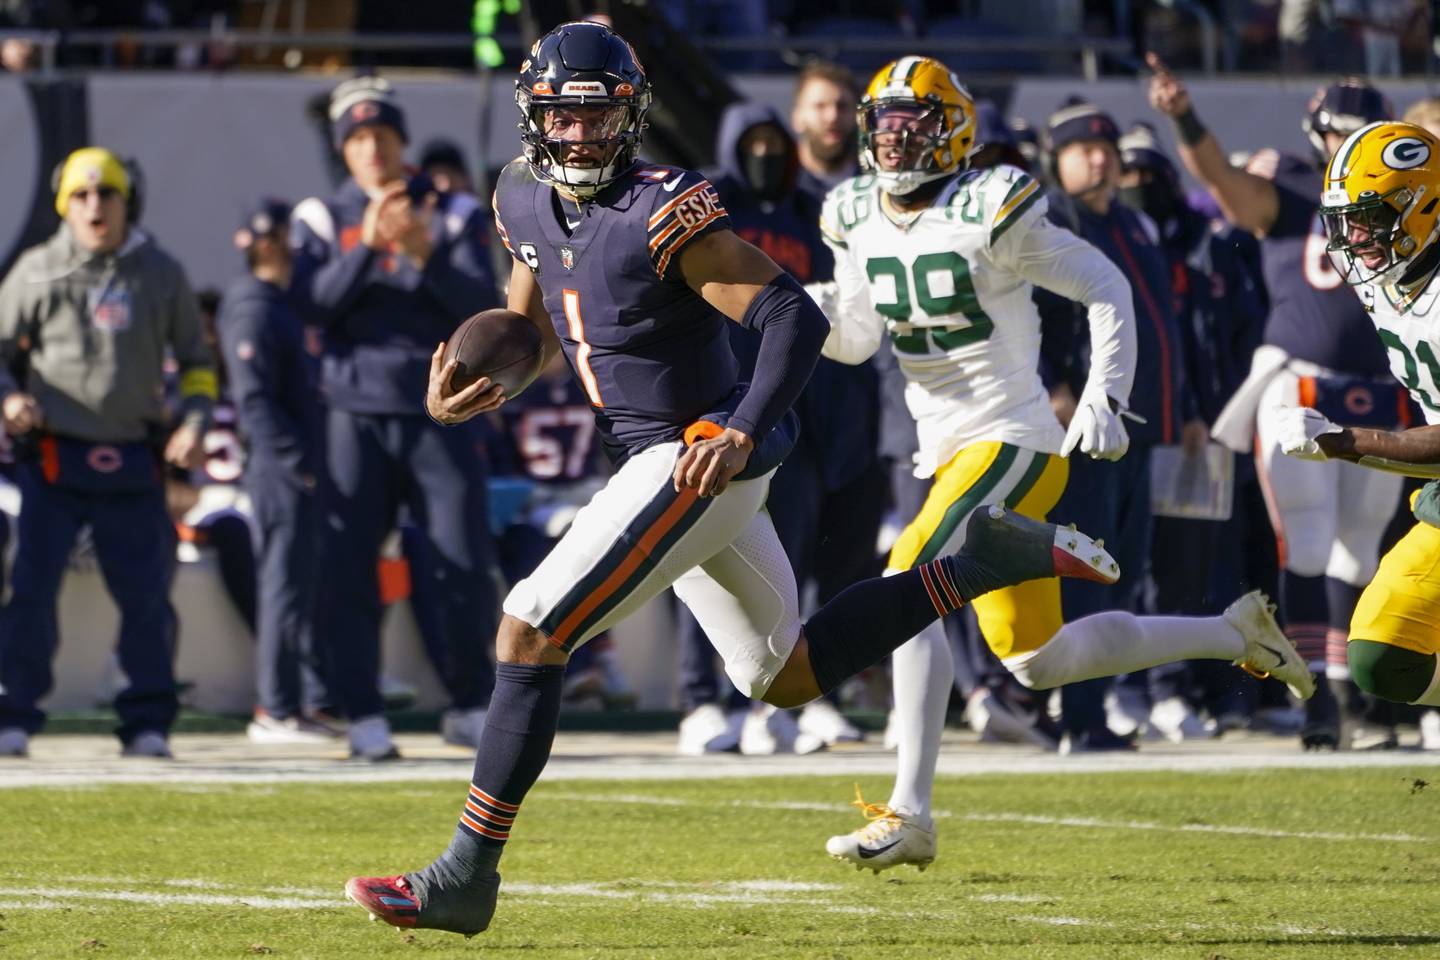 Chicago Bears quarterback Justin Fields runs for a touchdown during the first half against the Green Bay Packers, Sunday, Dec. 4, 2022, in Chicago.